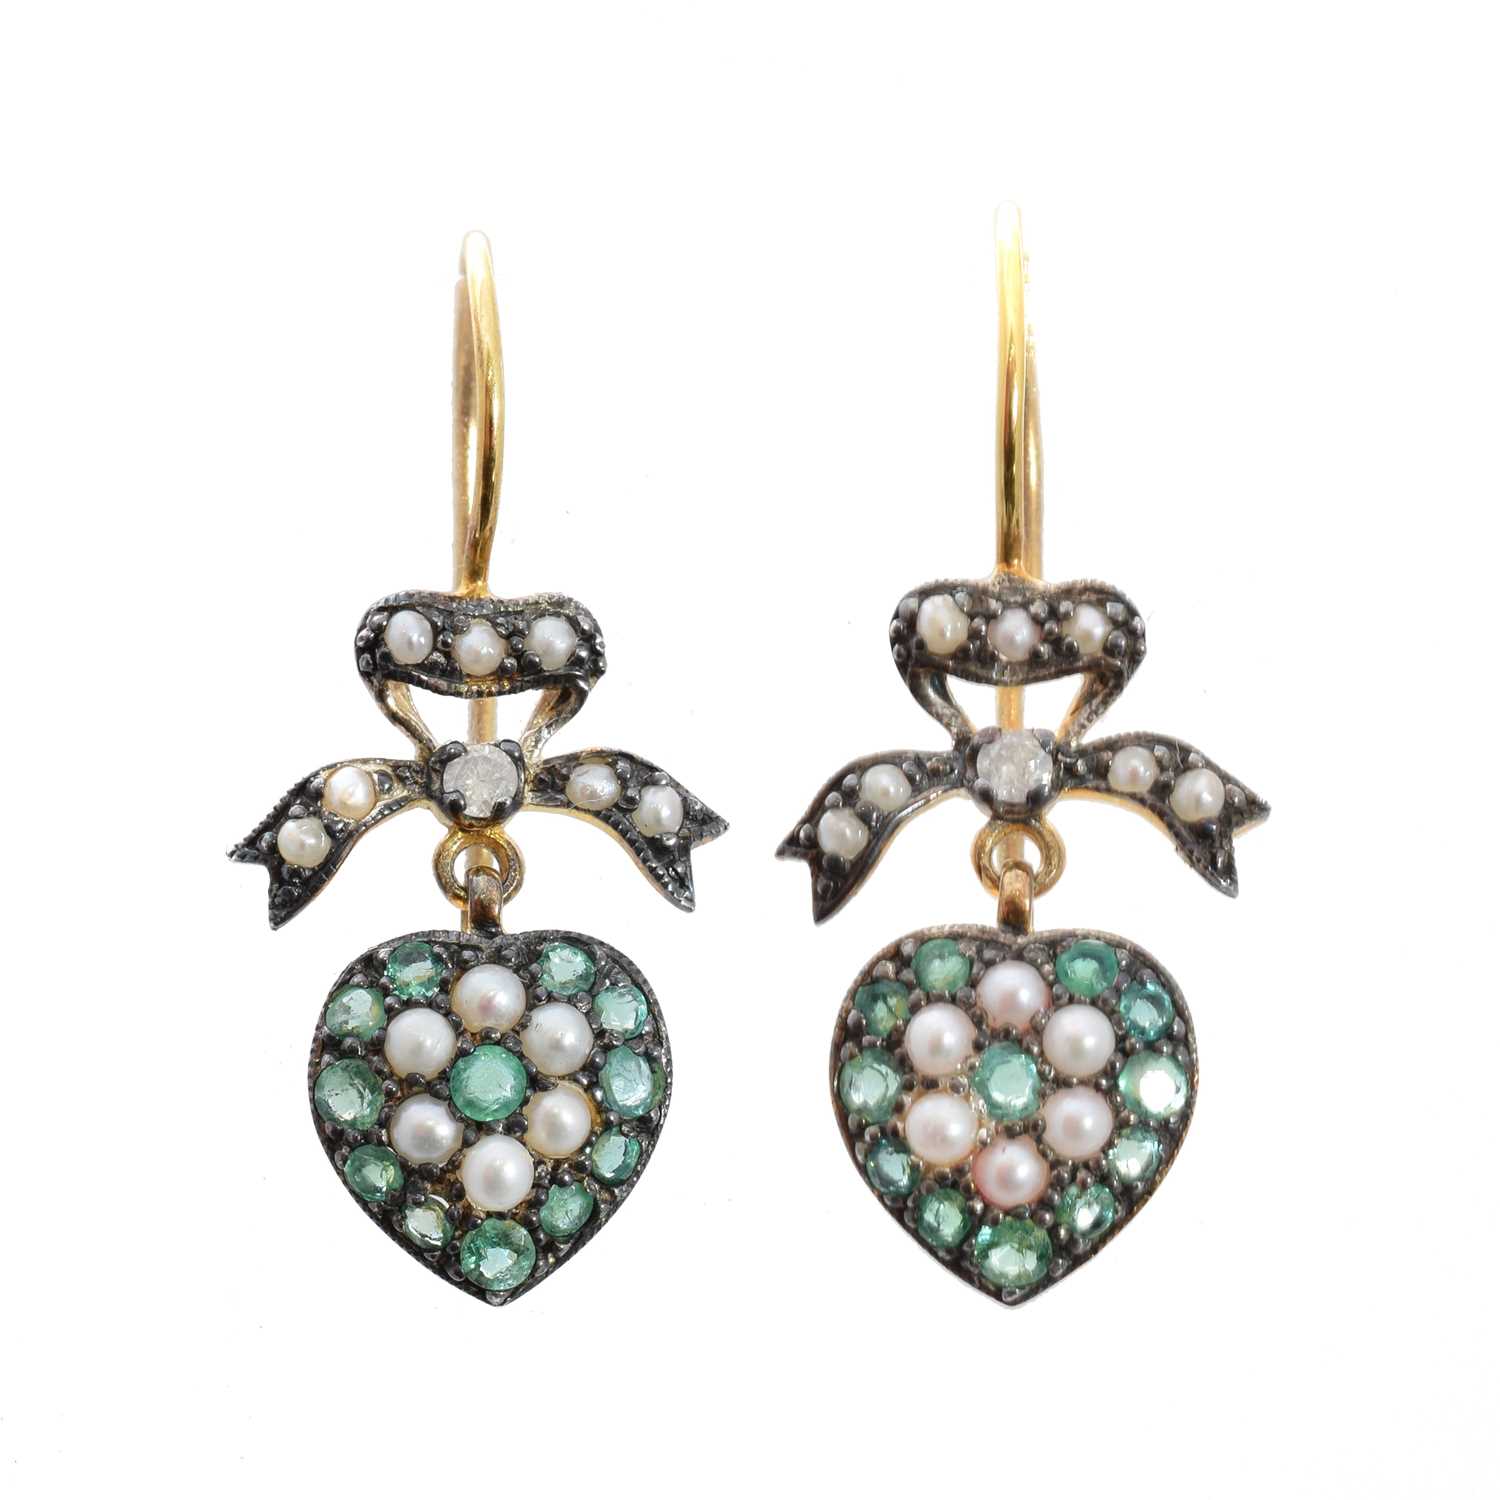 Lot 78 - A pair of emerald, seed pearl and diamond earrings